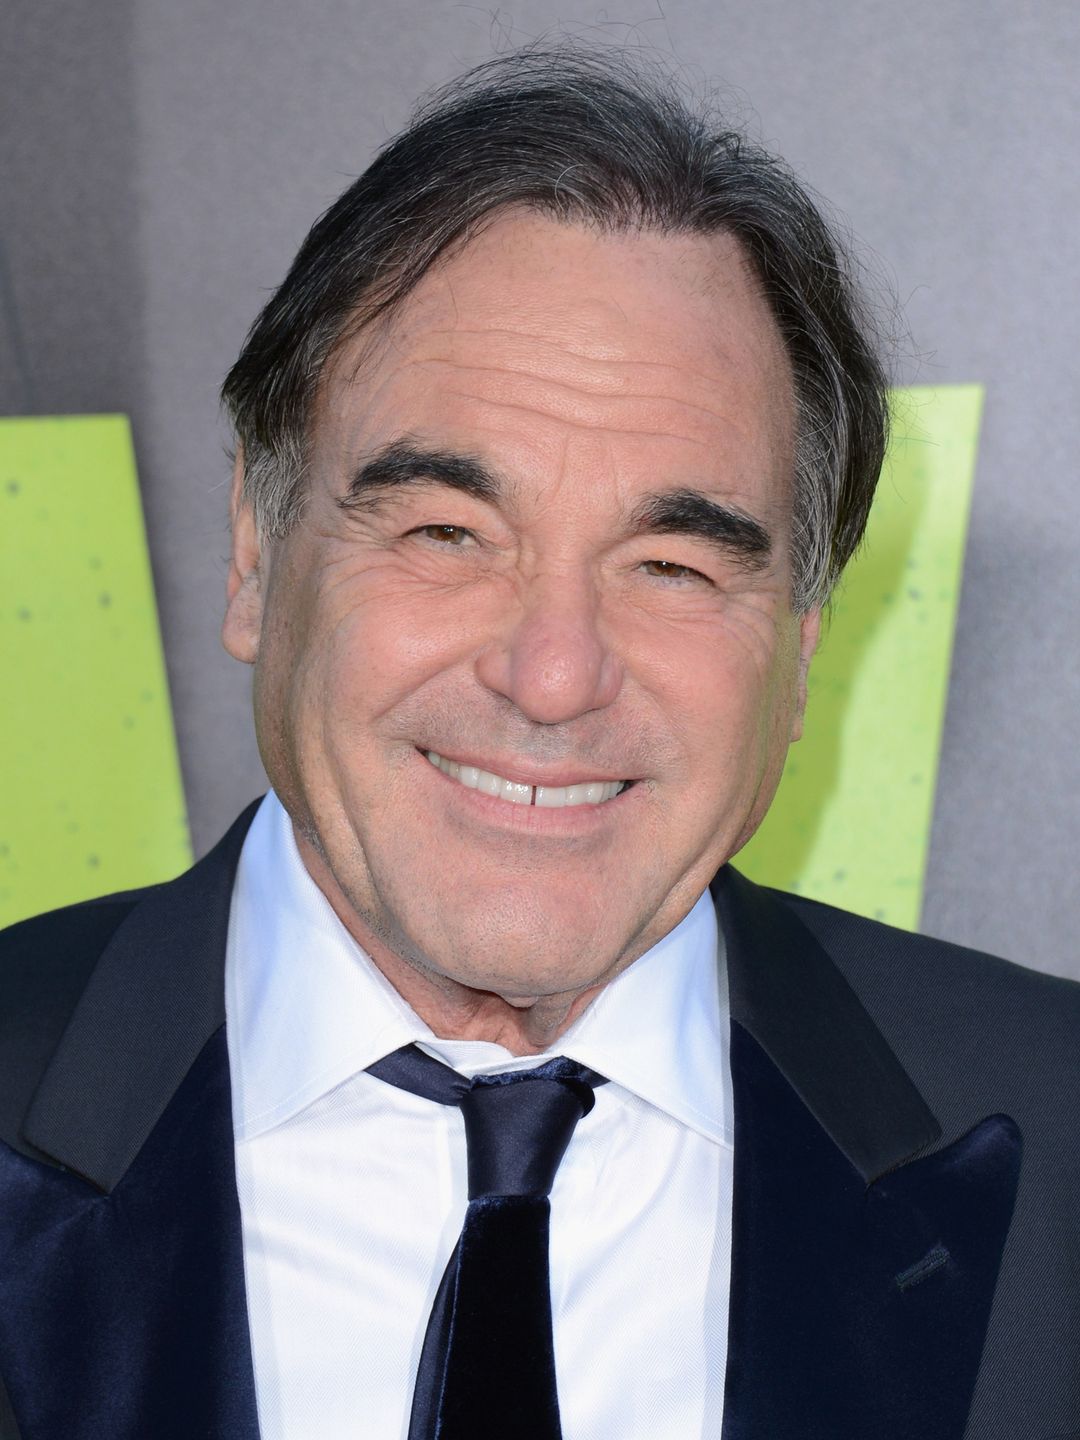 Oliver Stone young pics